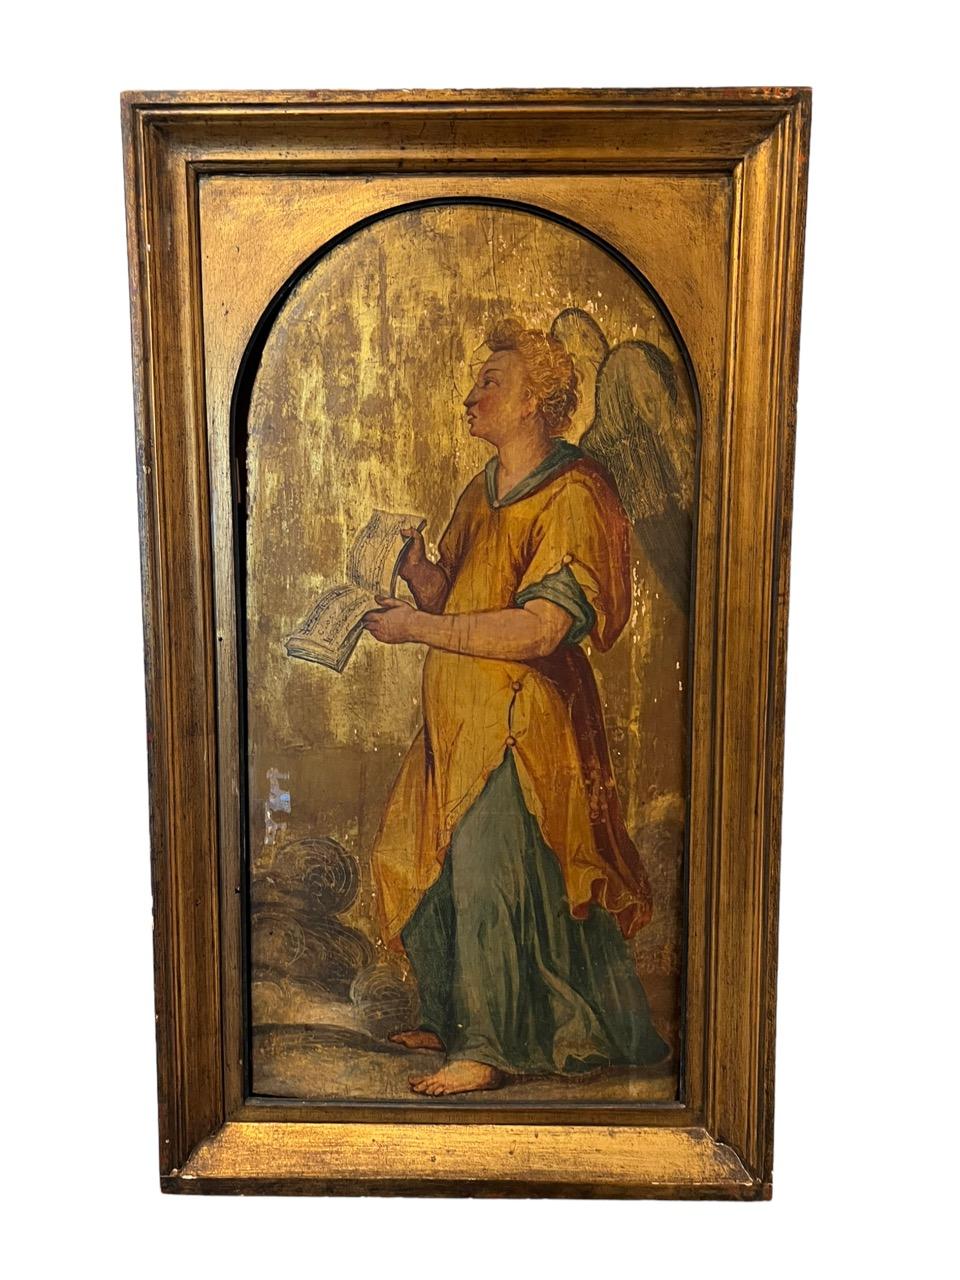 18th century French pair of oils on gold leaf panels. One is depicting an angel playing the violin, and the other one is holding the music book.